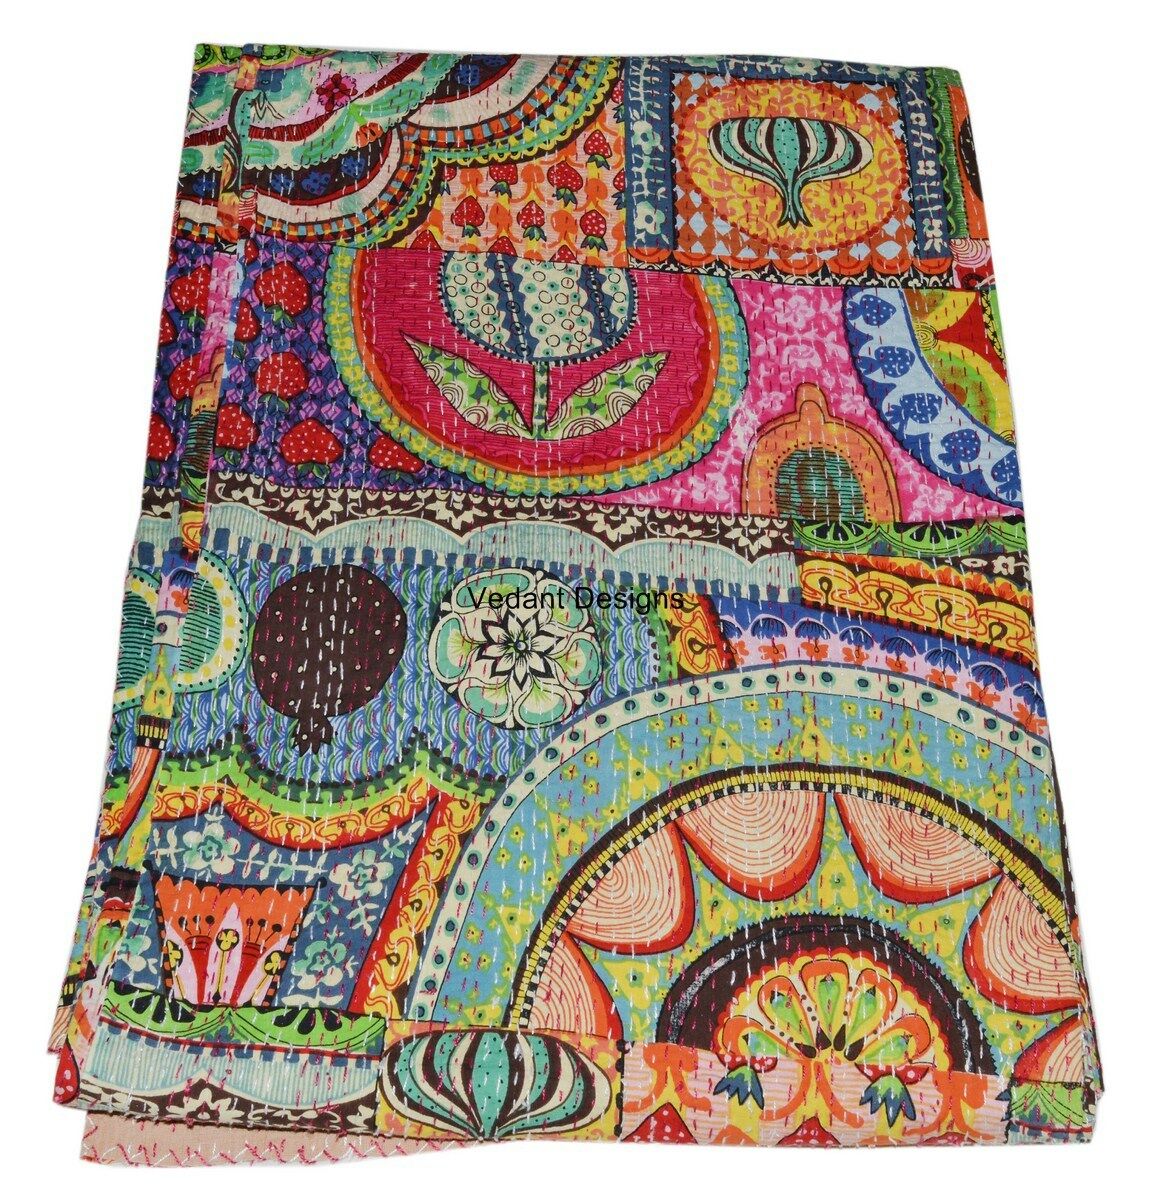 V Vedant Designs Indian Handmade Queen Cotton Twin Kantha Quilt Throw Blanket Bedsread 90x60 Inch